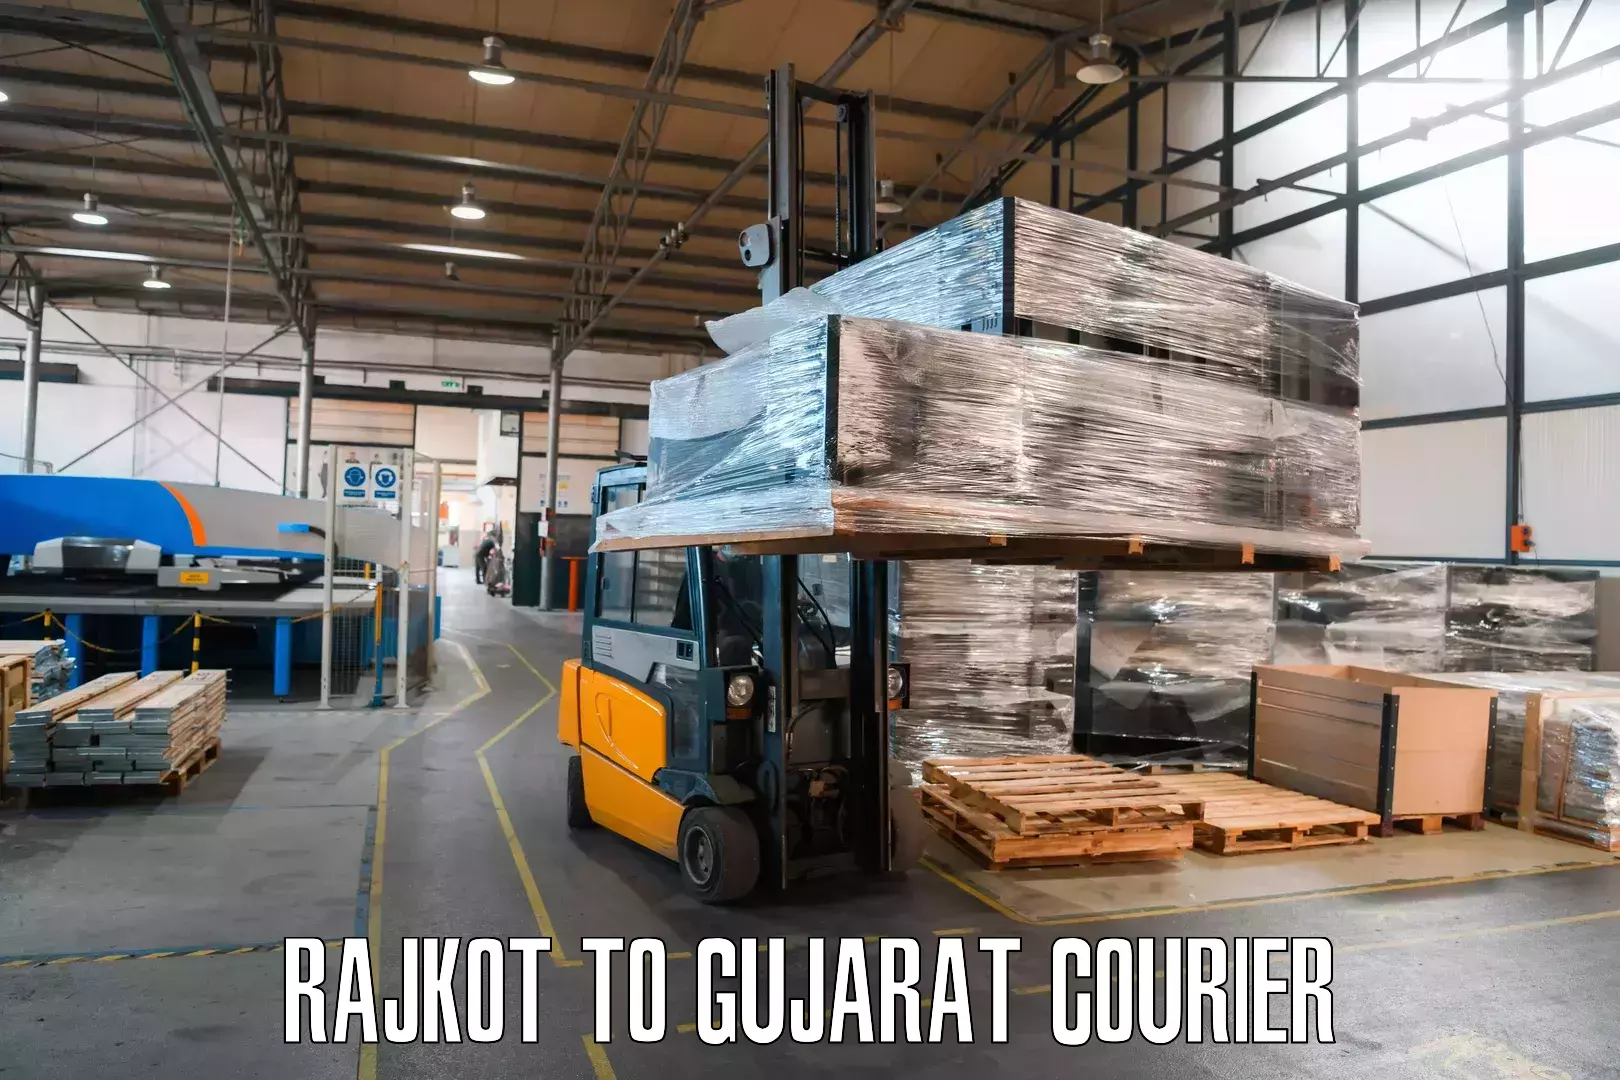 Global courier networks Rajkot to Mehsana